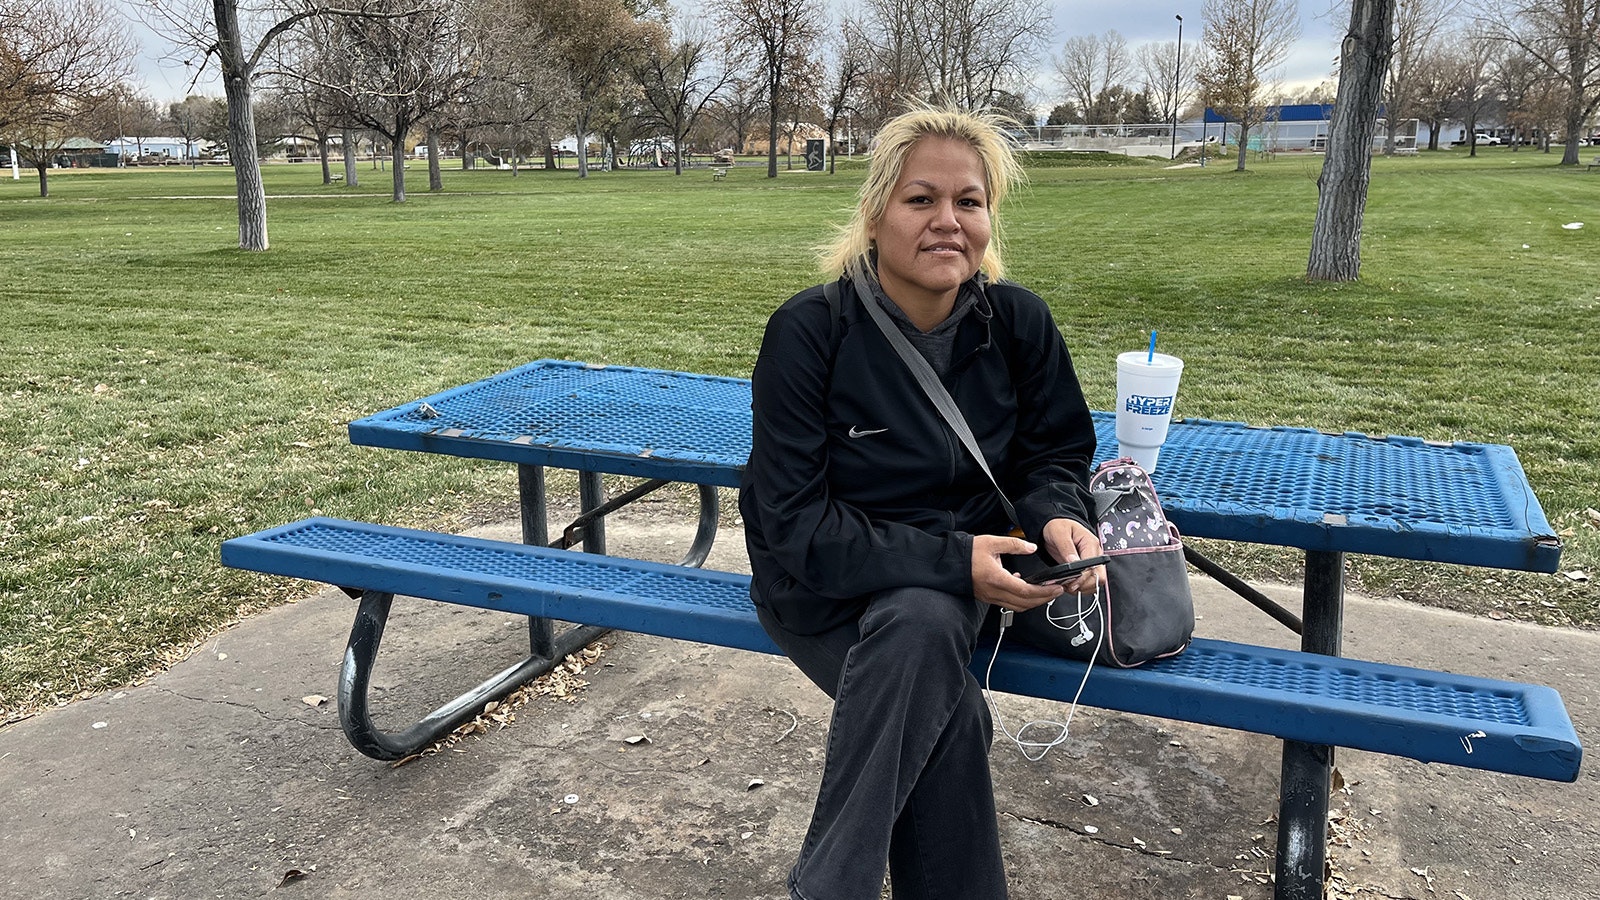 Kristen Lee is one of the few in Riverton's City Park who said she doesn't currently have a home.